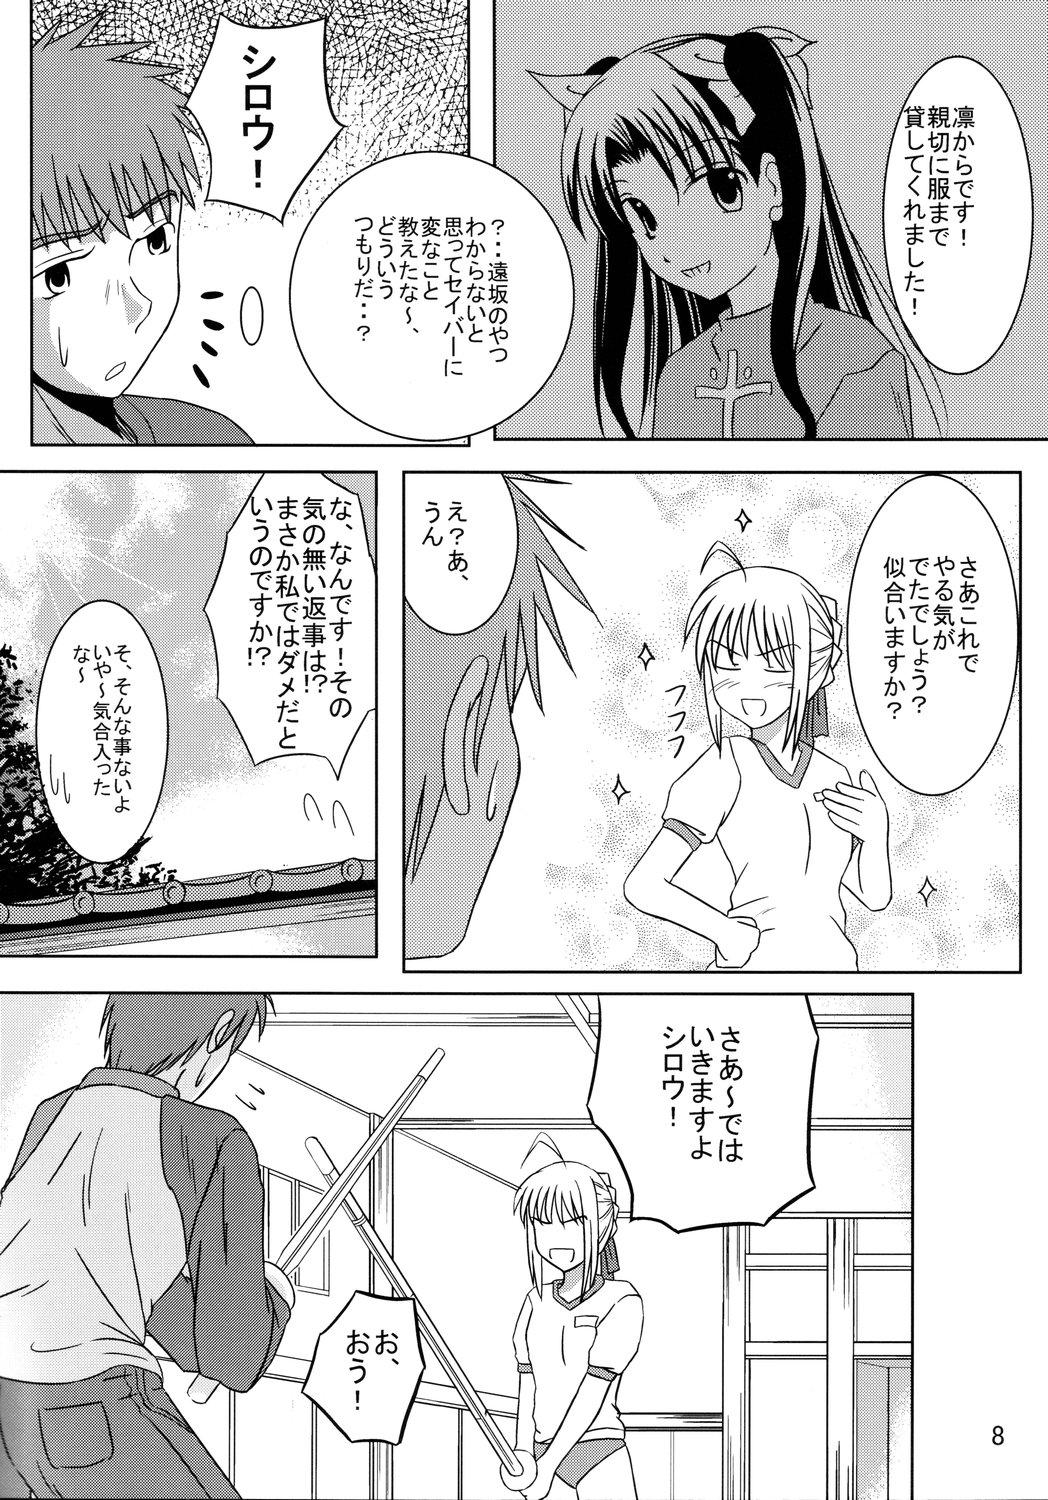 Tanga Saber Of Sanity - Fate stay night Shower - Page 7